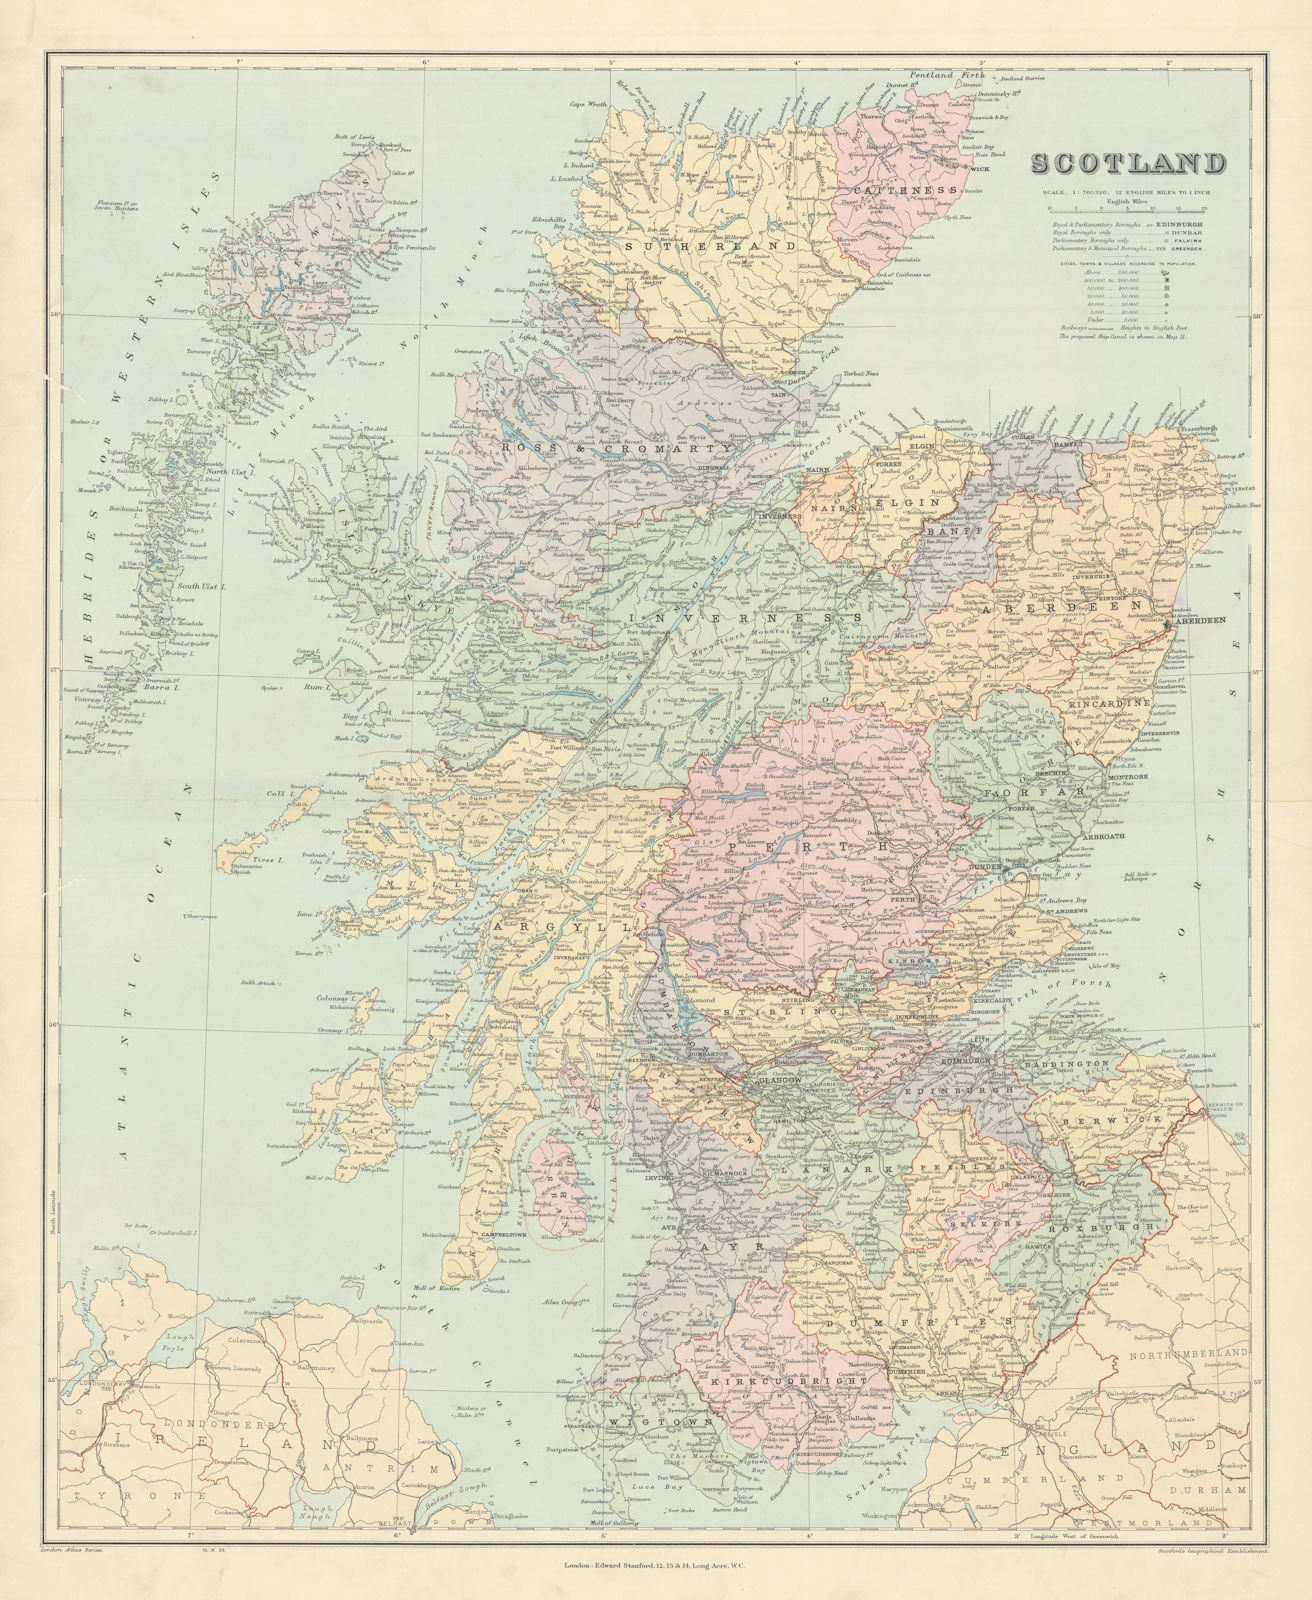 Associate Product Scotland. Counties & railways. Large 66x54cm. STANFORD 1904 old antique map